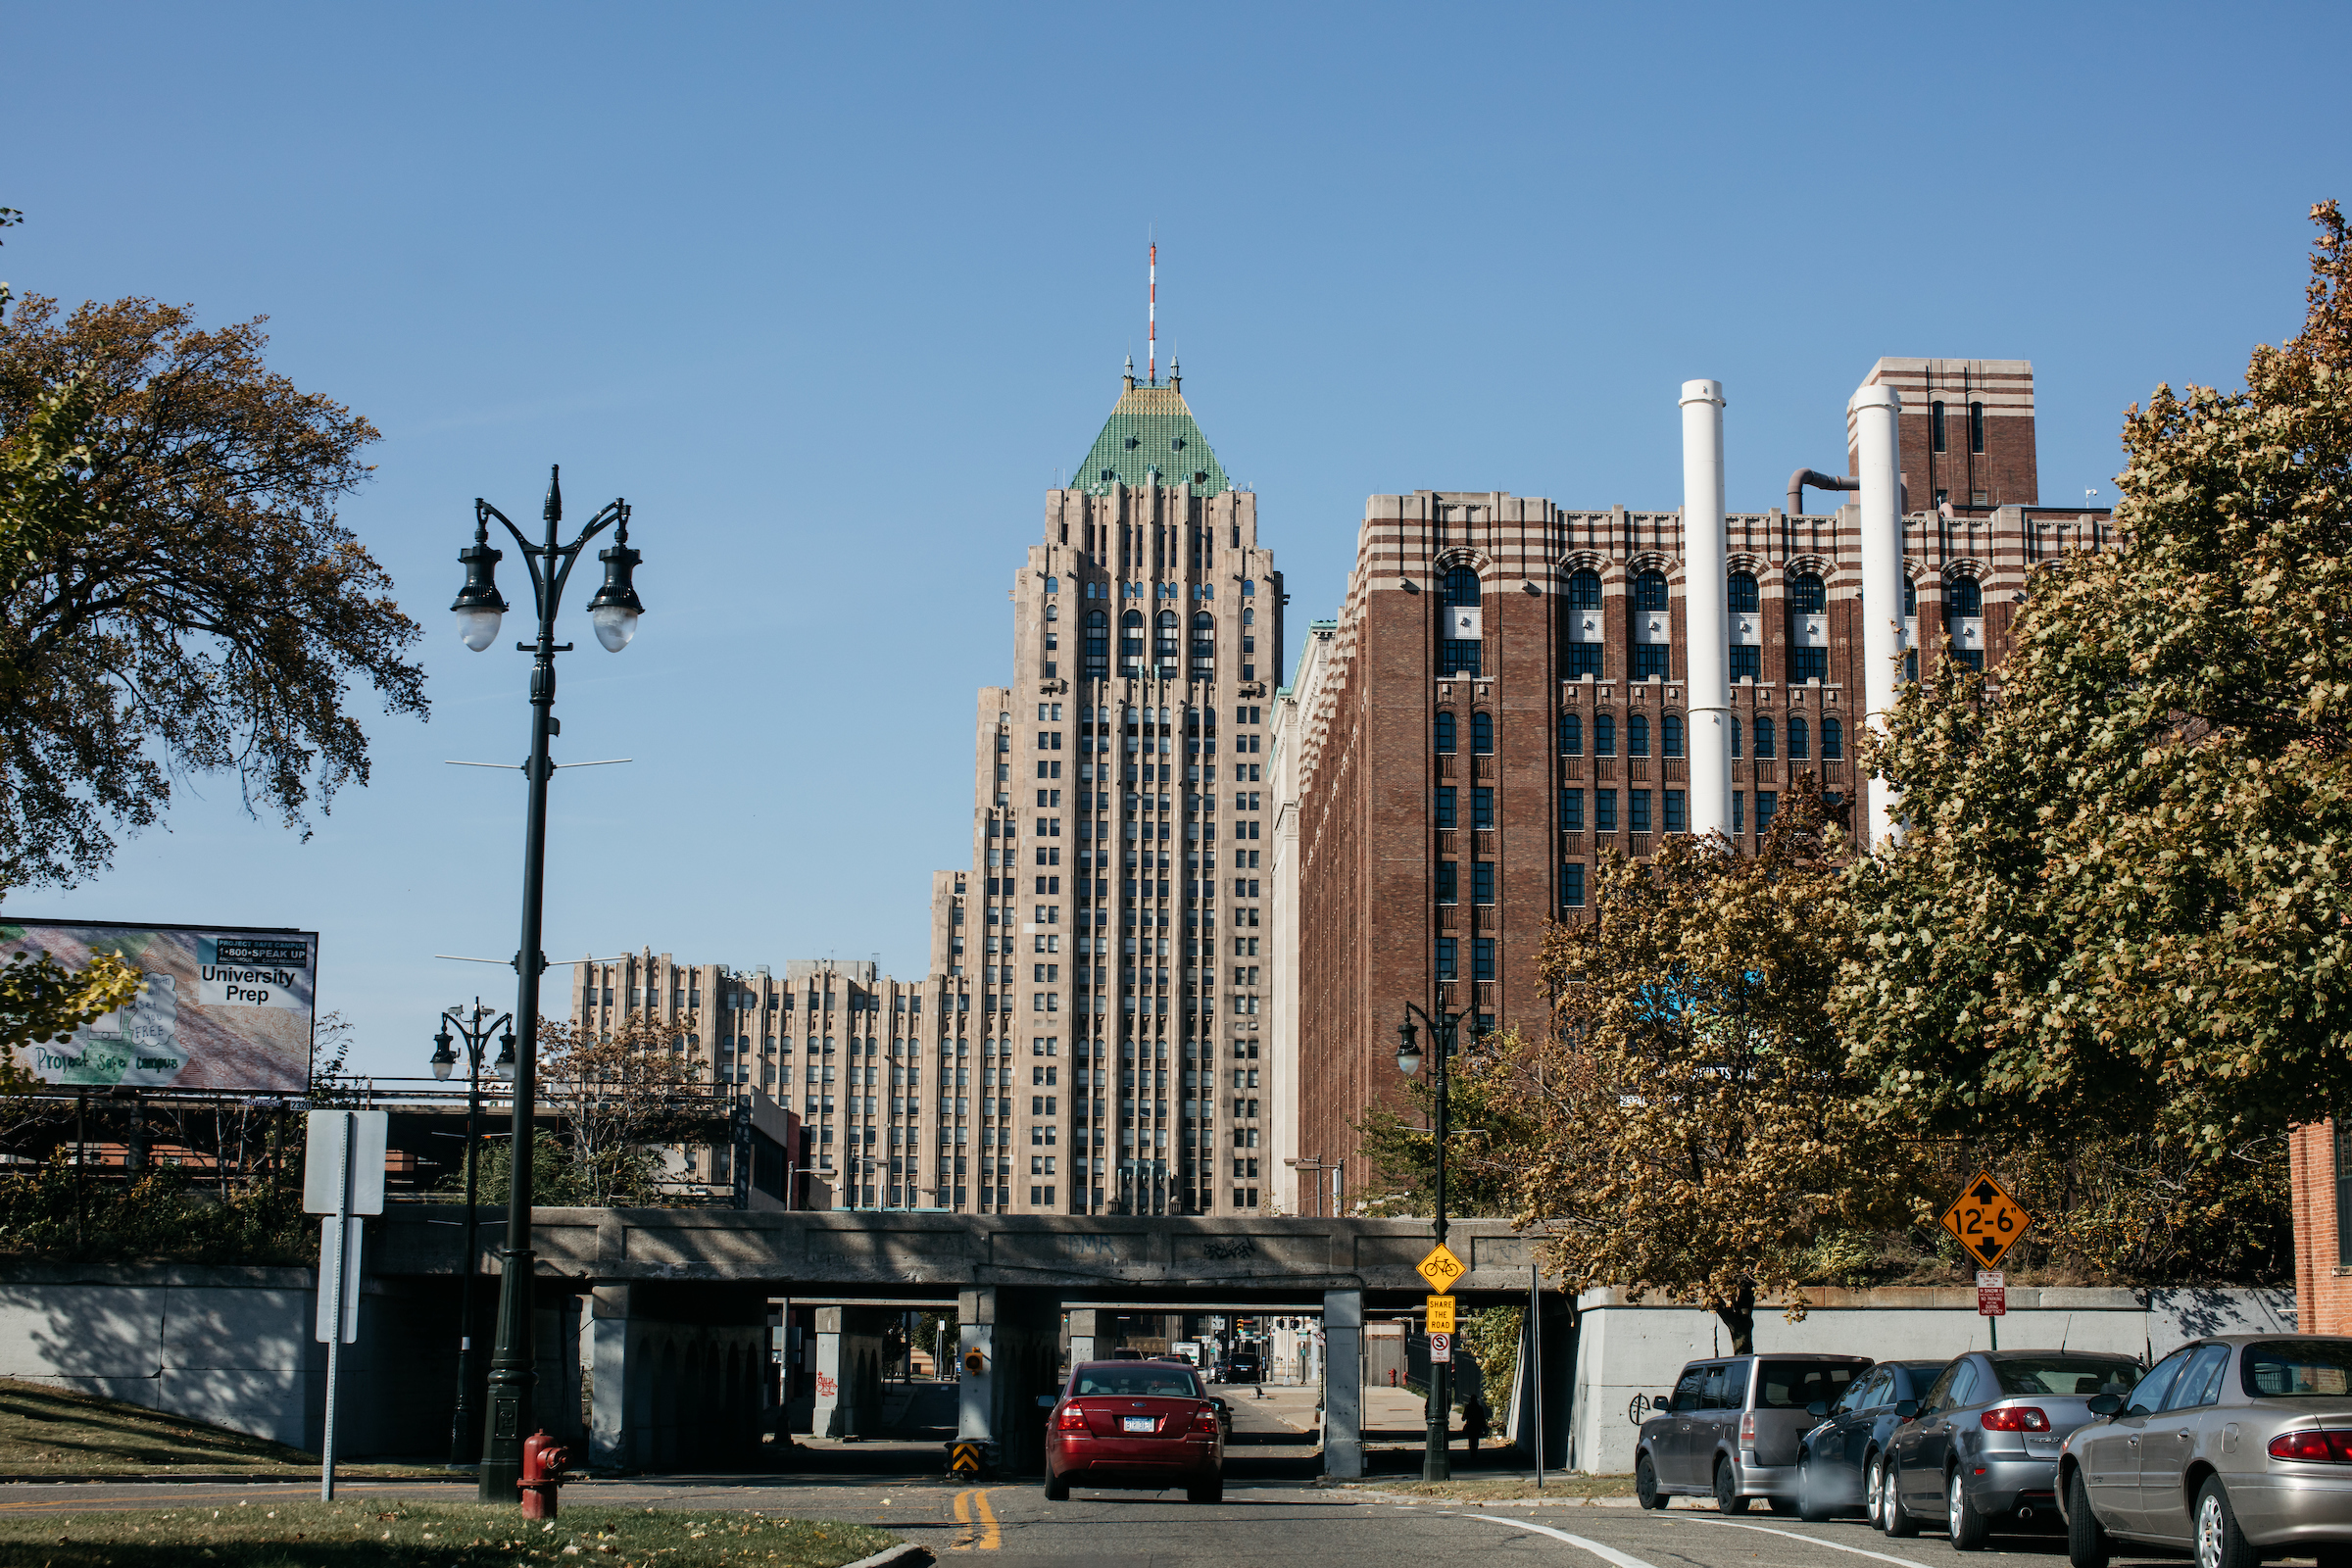 A road leads through an underpass in the foreground. In the background, there’s a tall brick building with white brick stripes and an even taller stone building with two towers. 